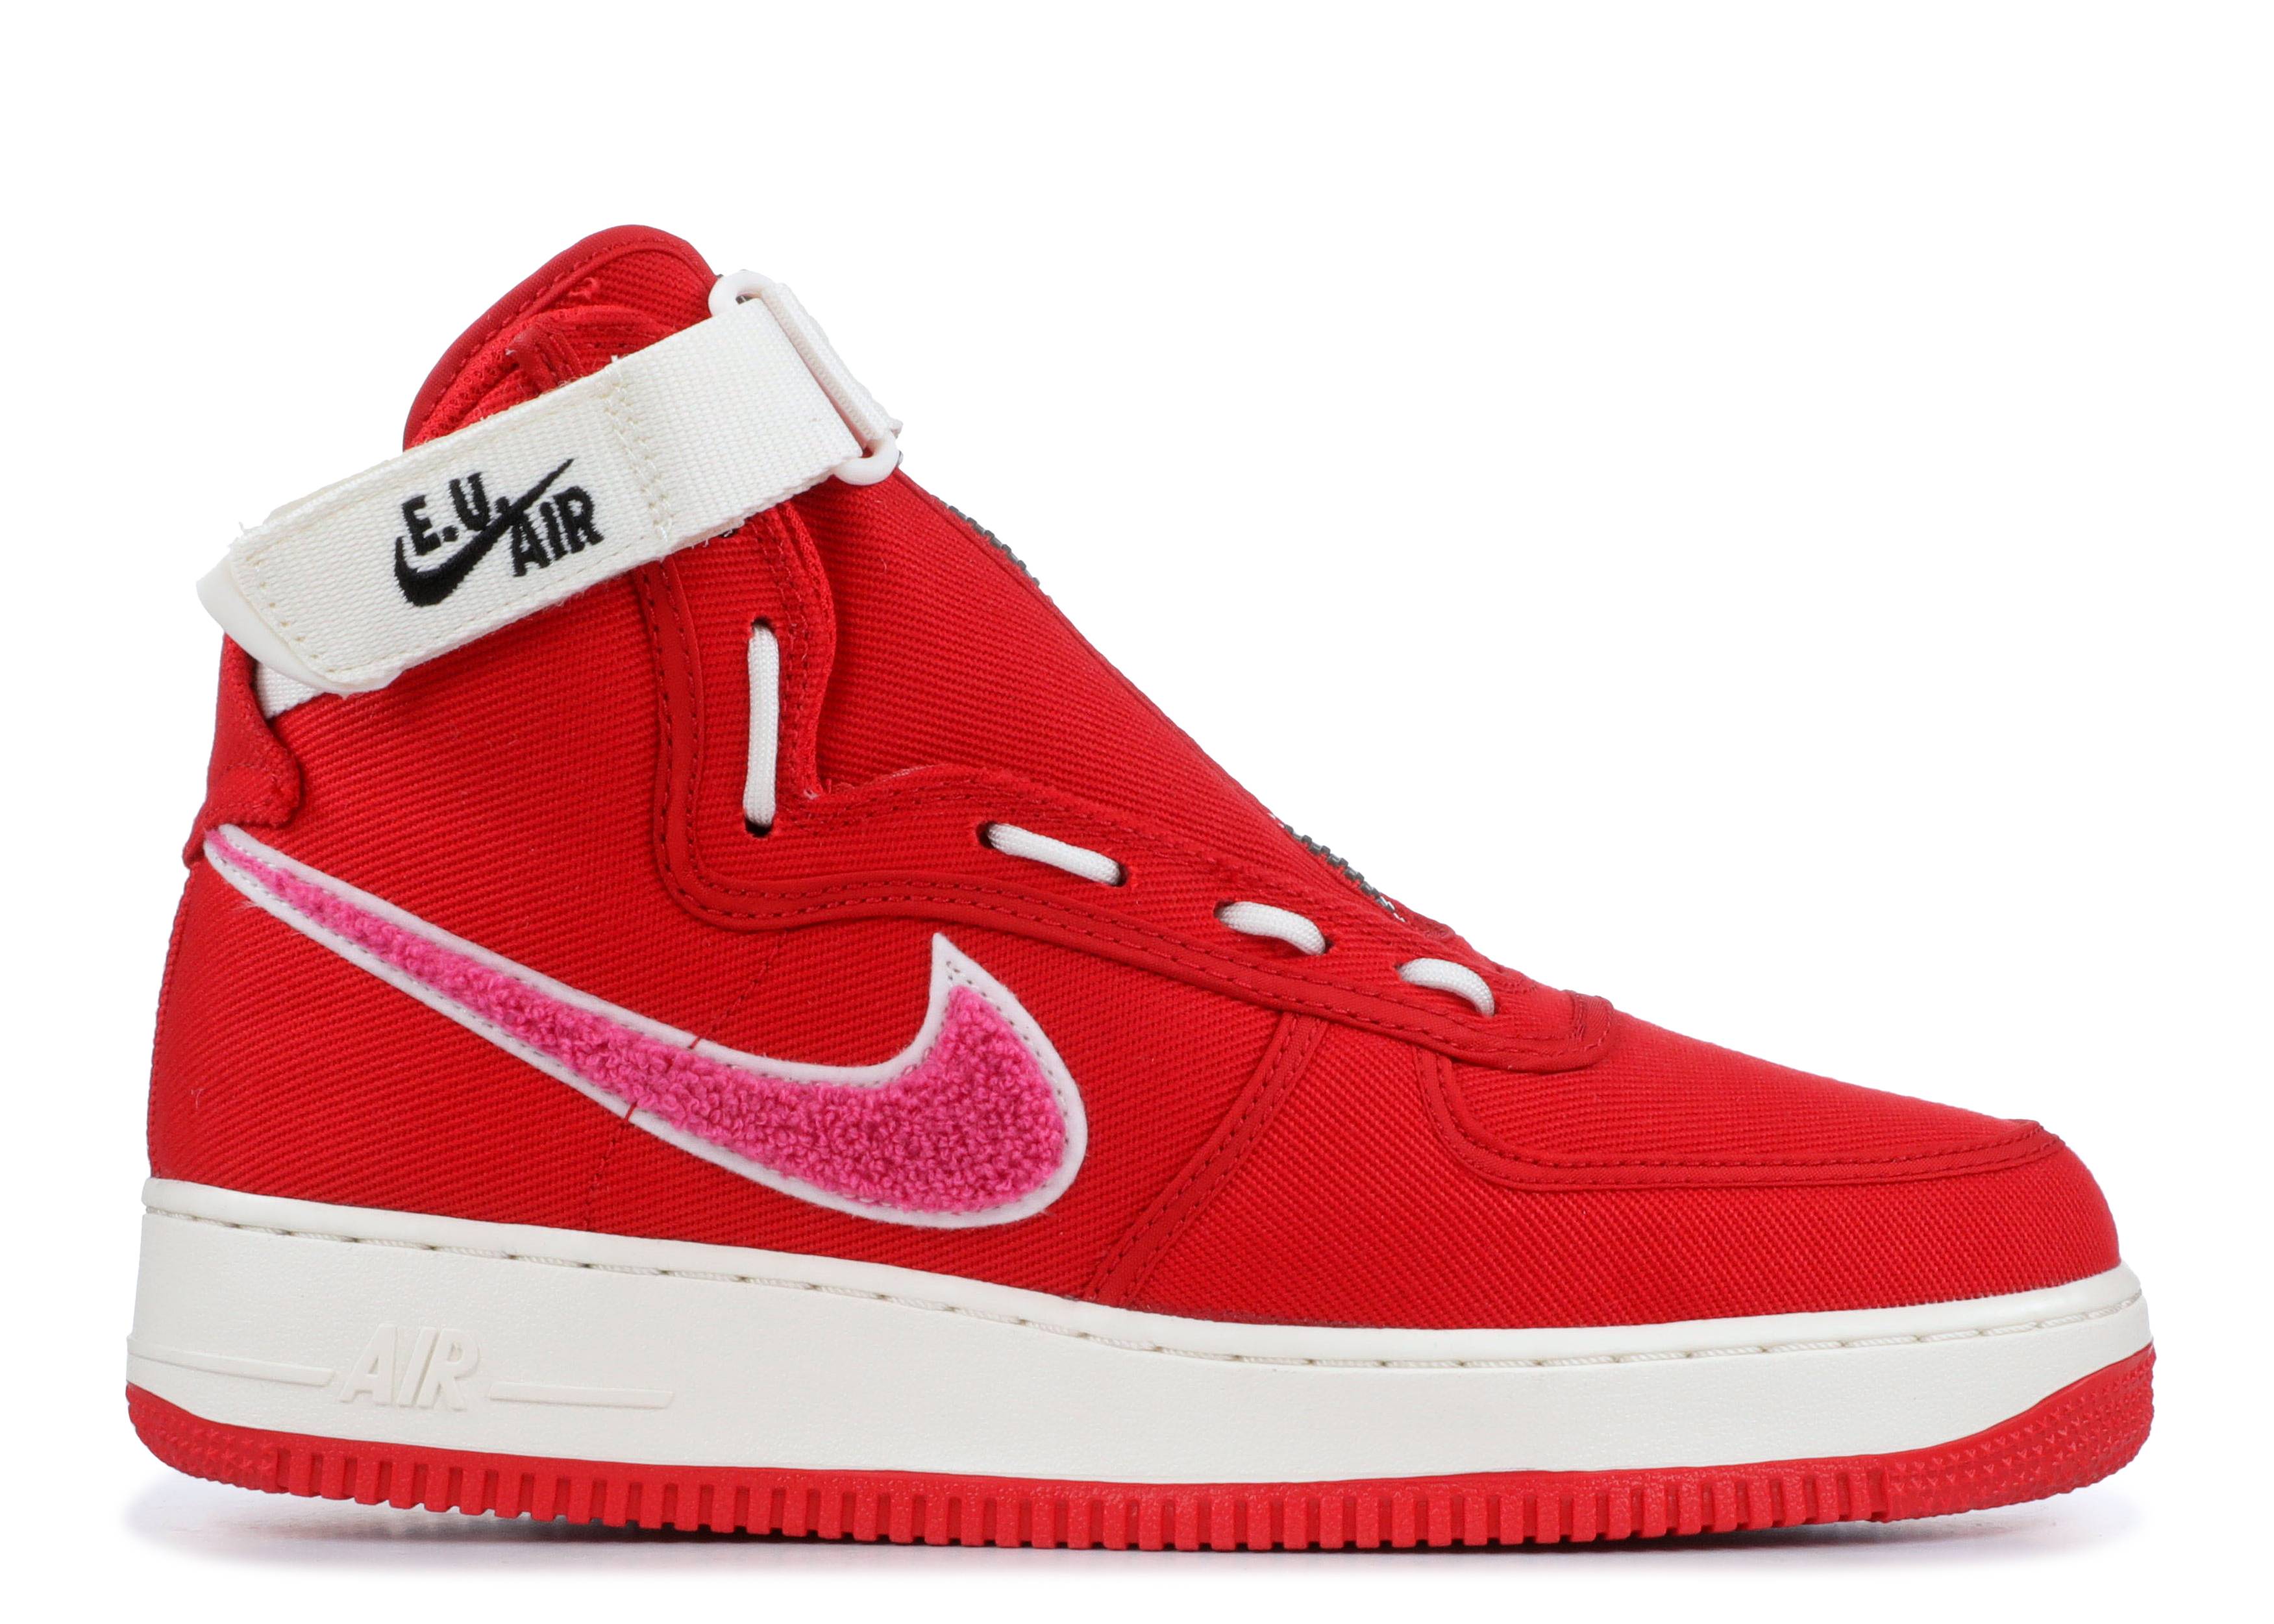 Emotionally Unavailable x Air Force 1 High 'Heart'